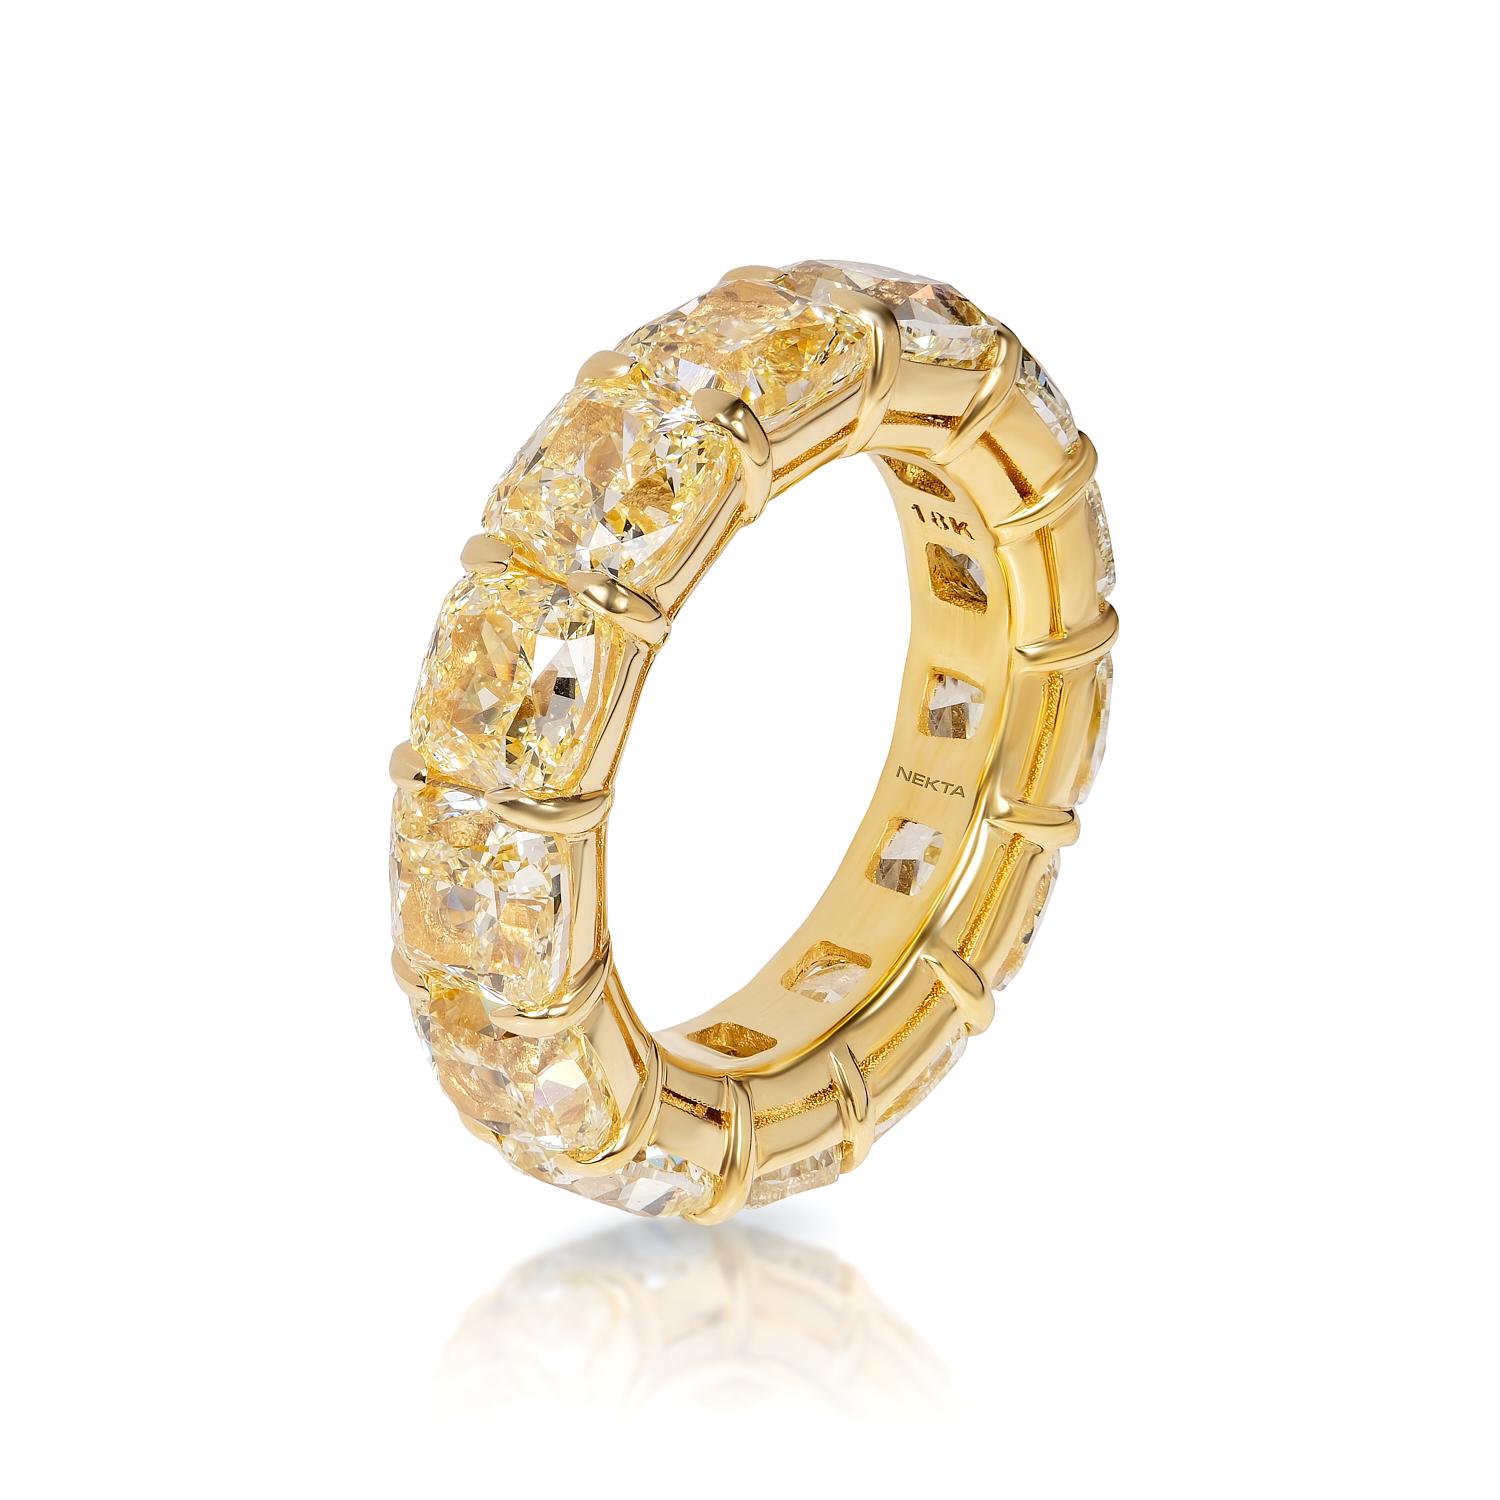 The TZE wedding eternity band features thirteen 1 carat cushion cut  yellow diamonds weighing a total of approximately 14 carats, Shared prong set in 18k yellow Gold.

ETERNITY BAND / Wedding Bands Eternity SHARED PRONG

Diamonds
Diamond Size: 1